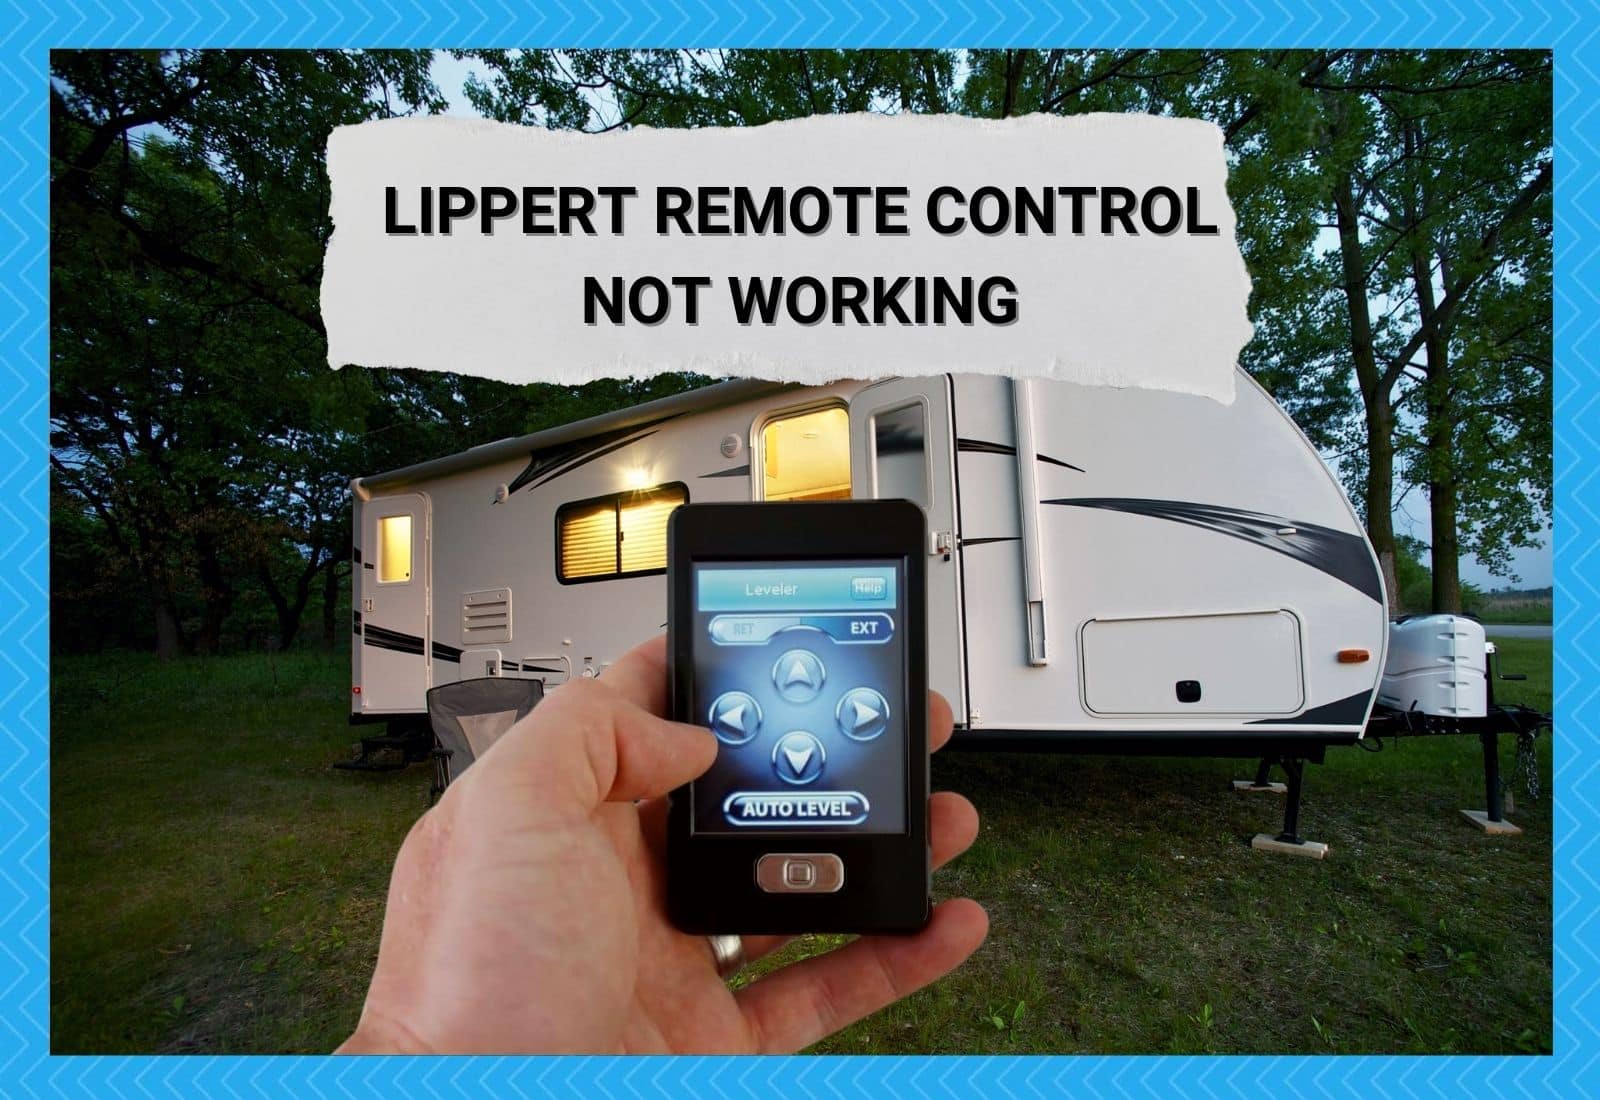 Lippert Remote Control Not Working